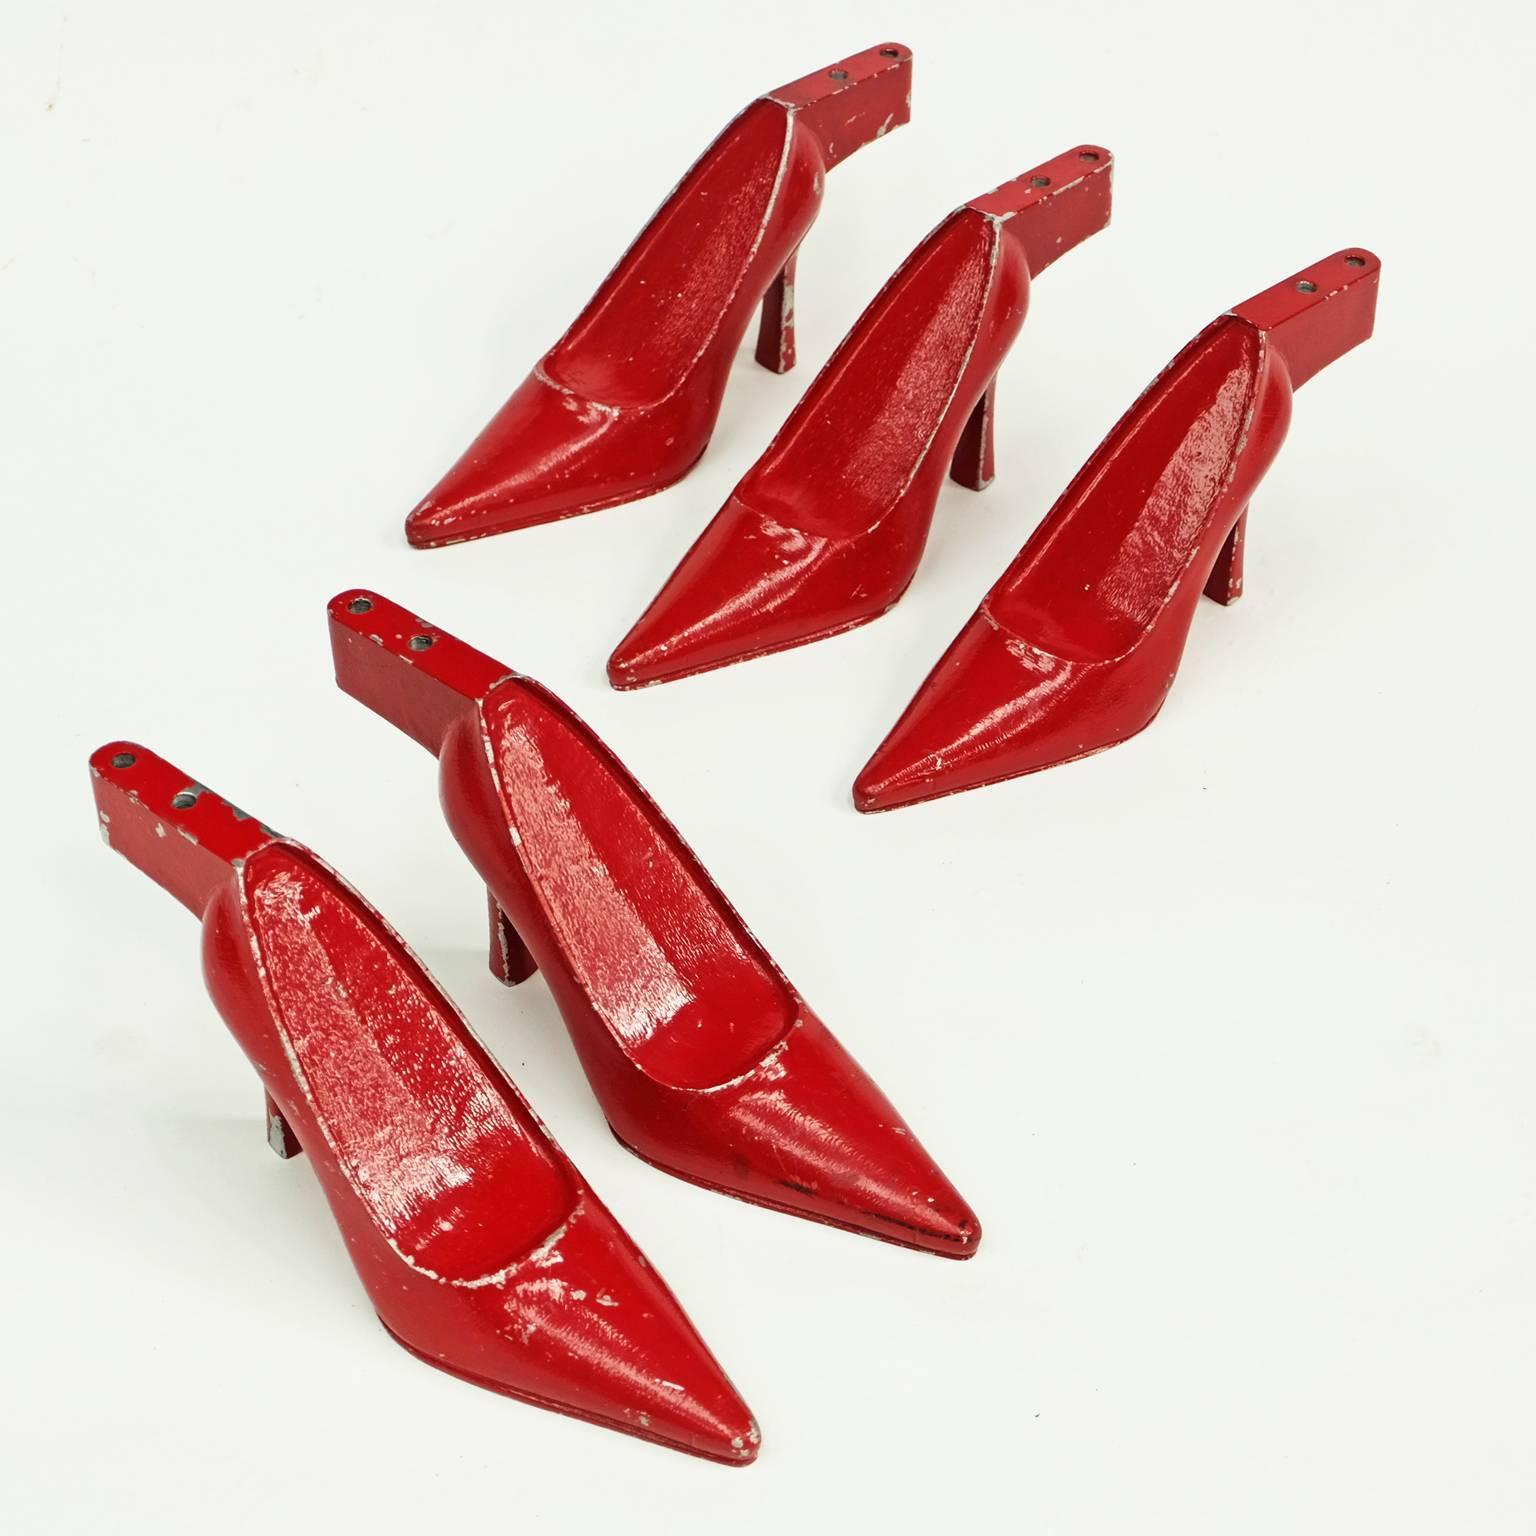 Set of five x 1950s Stiletto shoe displays. Red painted steel form designed and manufactured in the United Kingdom.

The shoes can be displayed as a group or individually. 

Signs of original age to the red painted surface.
Each shoe weighs an